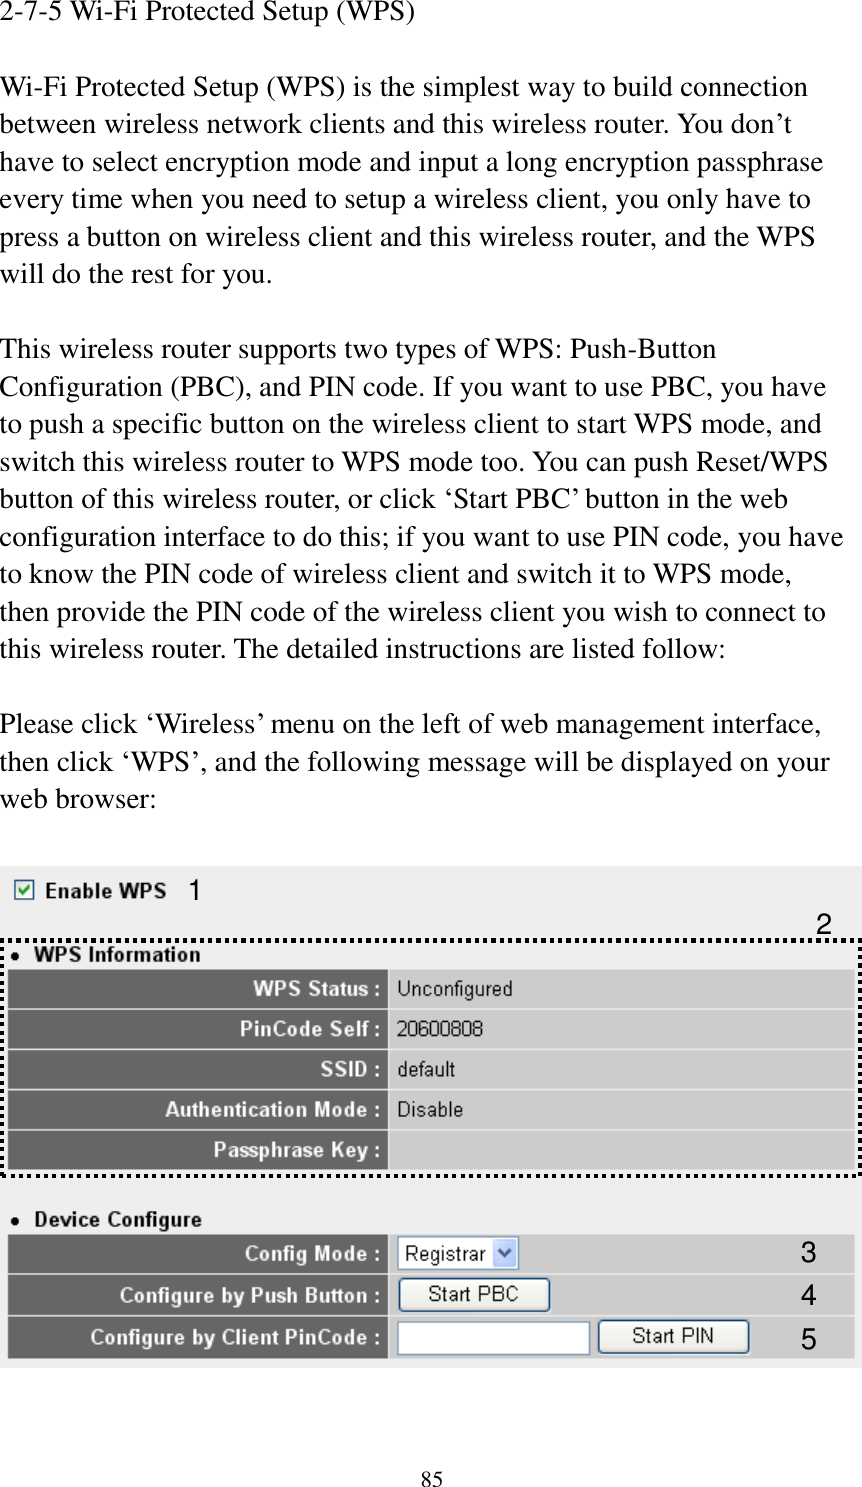 85 2-7-5 Wi-Fi Protected Setup (WPS)  Wi-Fi Protected Setup (WPS) is the simplest way to build connection between wireless network clients and this wireless router. You don‟t have to select encryption mode and input a long encryption passphrase every time when you need to setup a wireless client, you only have to press a button on wireless client and this wireless router, and the WPS will do the rest for you.  This wireless router supports two types of WPS: Push-Button Configuration (PBC), and PIN code. If you want to use PBC, you have to push a specific button on the wireless client to start WPS mode, and switch this wireless router to WPS mode too. You can push Reset/WPS button of this wireless router, or click „Start PBC‟ button in the web configuration interface to do this; if you want to use PIN code, you have to know the PIN code of wireless client and switch it to WPS mode, then provide the PIN code of the wireless client you wish to connect to this wireless router. The detailed instructions are listed follow:  Please click „Wireless‟ menu on the left of web management interface, then click „WPS‟, and the following message will be displayed on your web browser:    1 3 4 2 5 